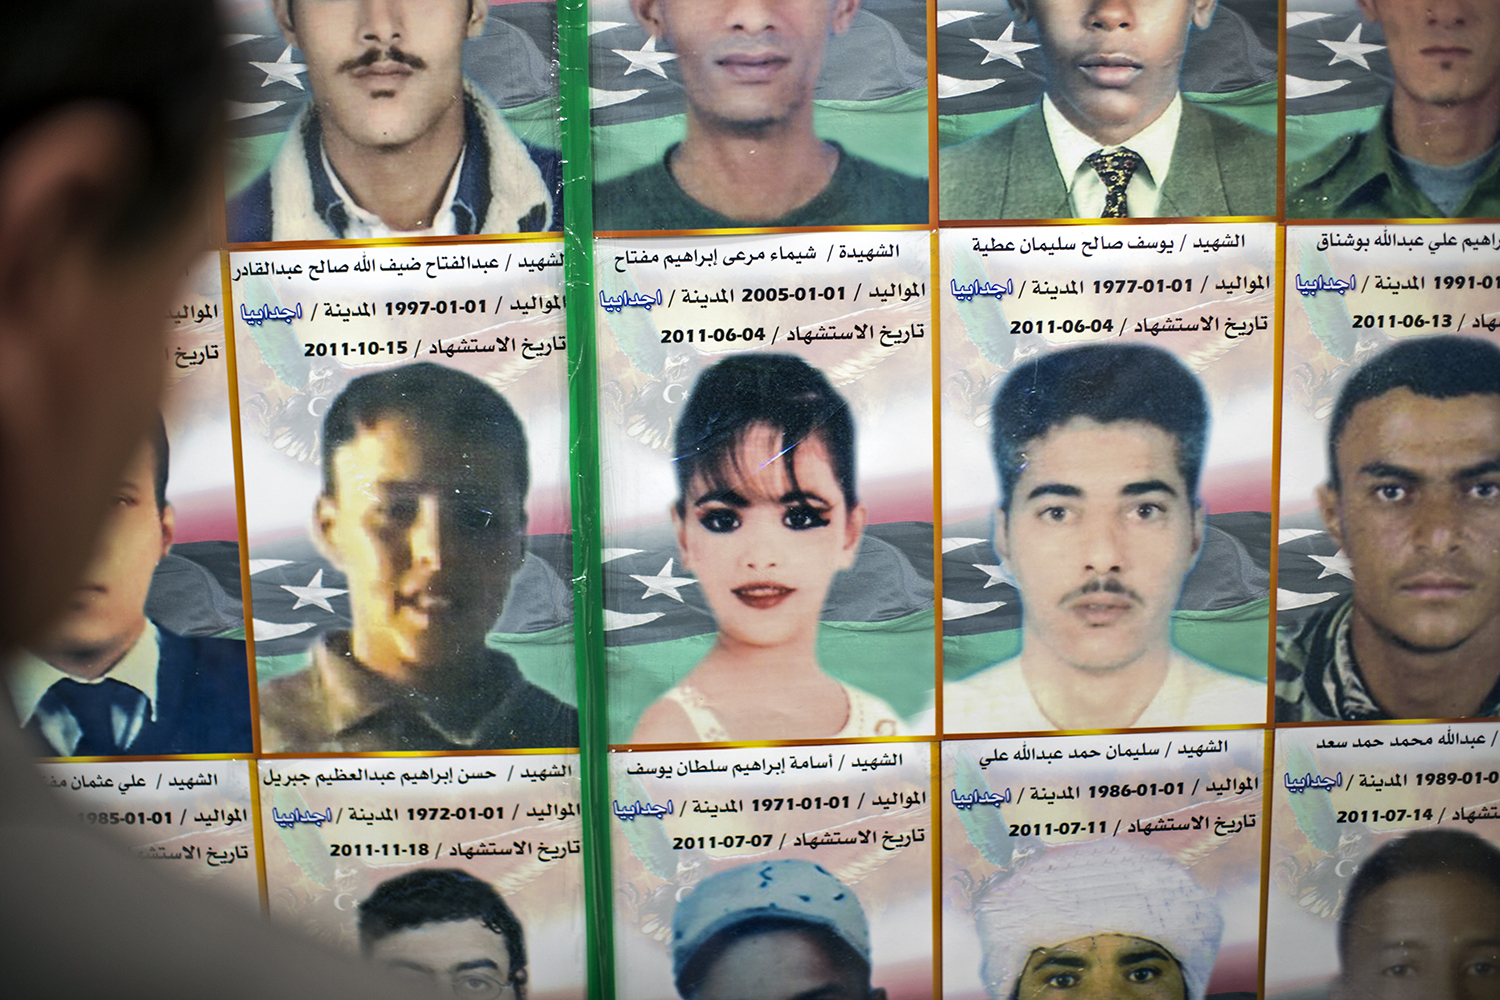 Images of Libyans who were killed during the 2011 siege of Misrata in the city's war museum. Women journalists have become acutely aware of their visibility since the uprising. (Iason Athanasiadis)